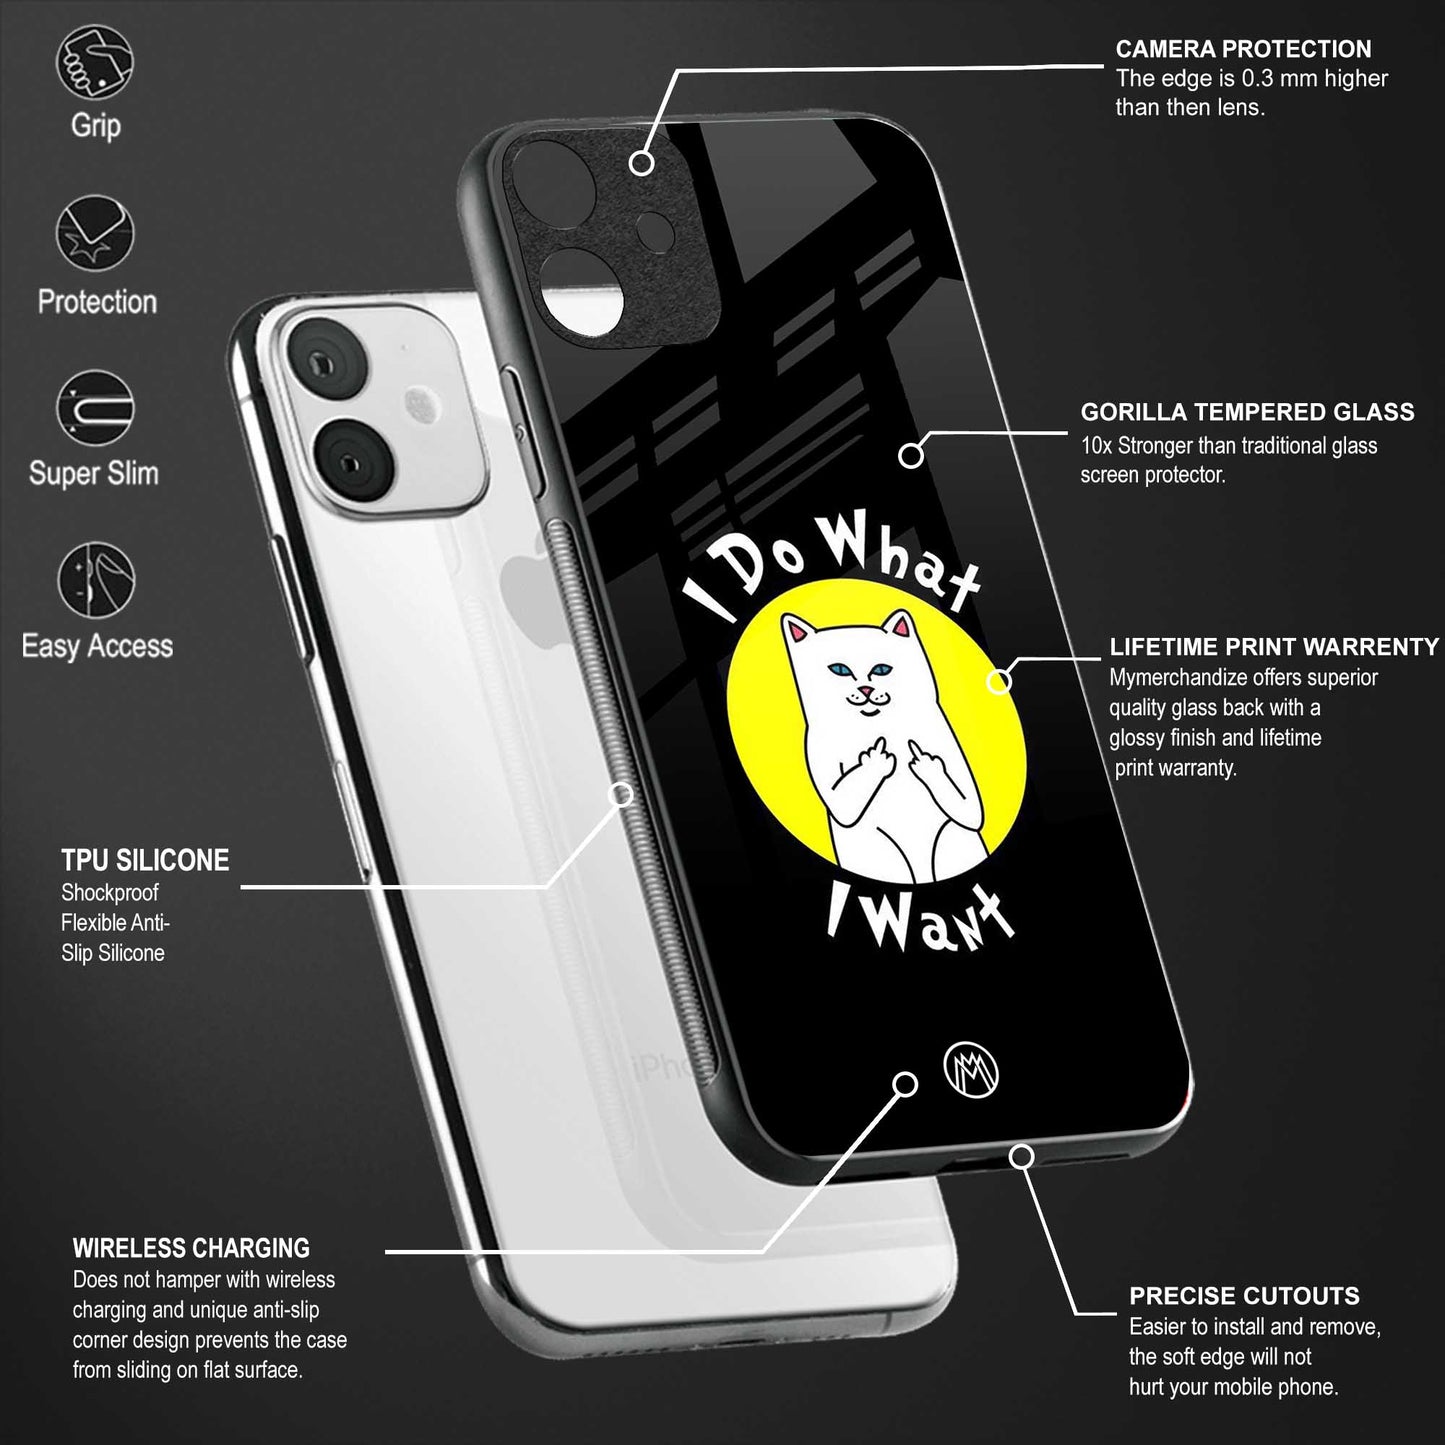 i do what i want glass case for realme xt